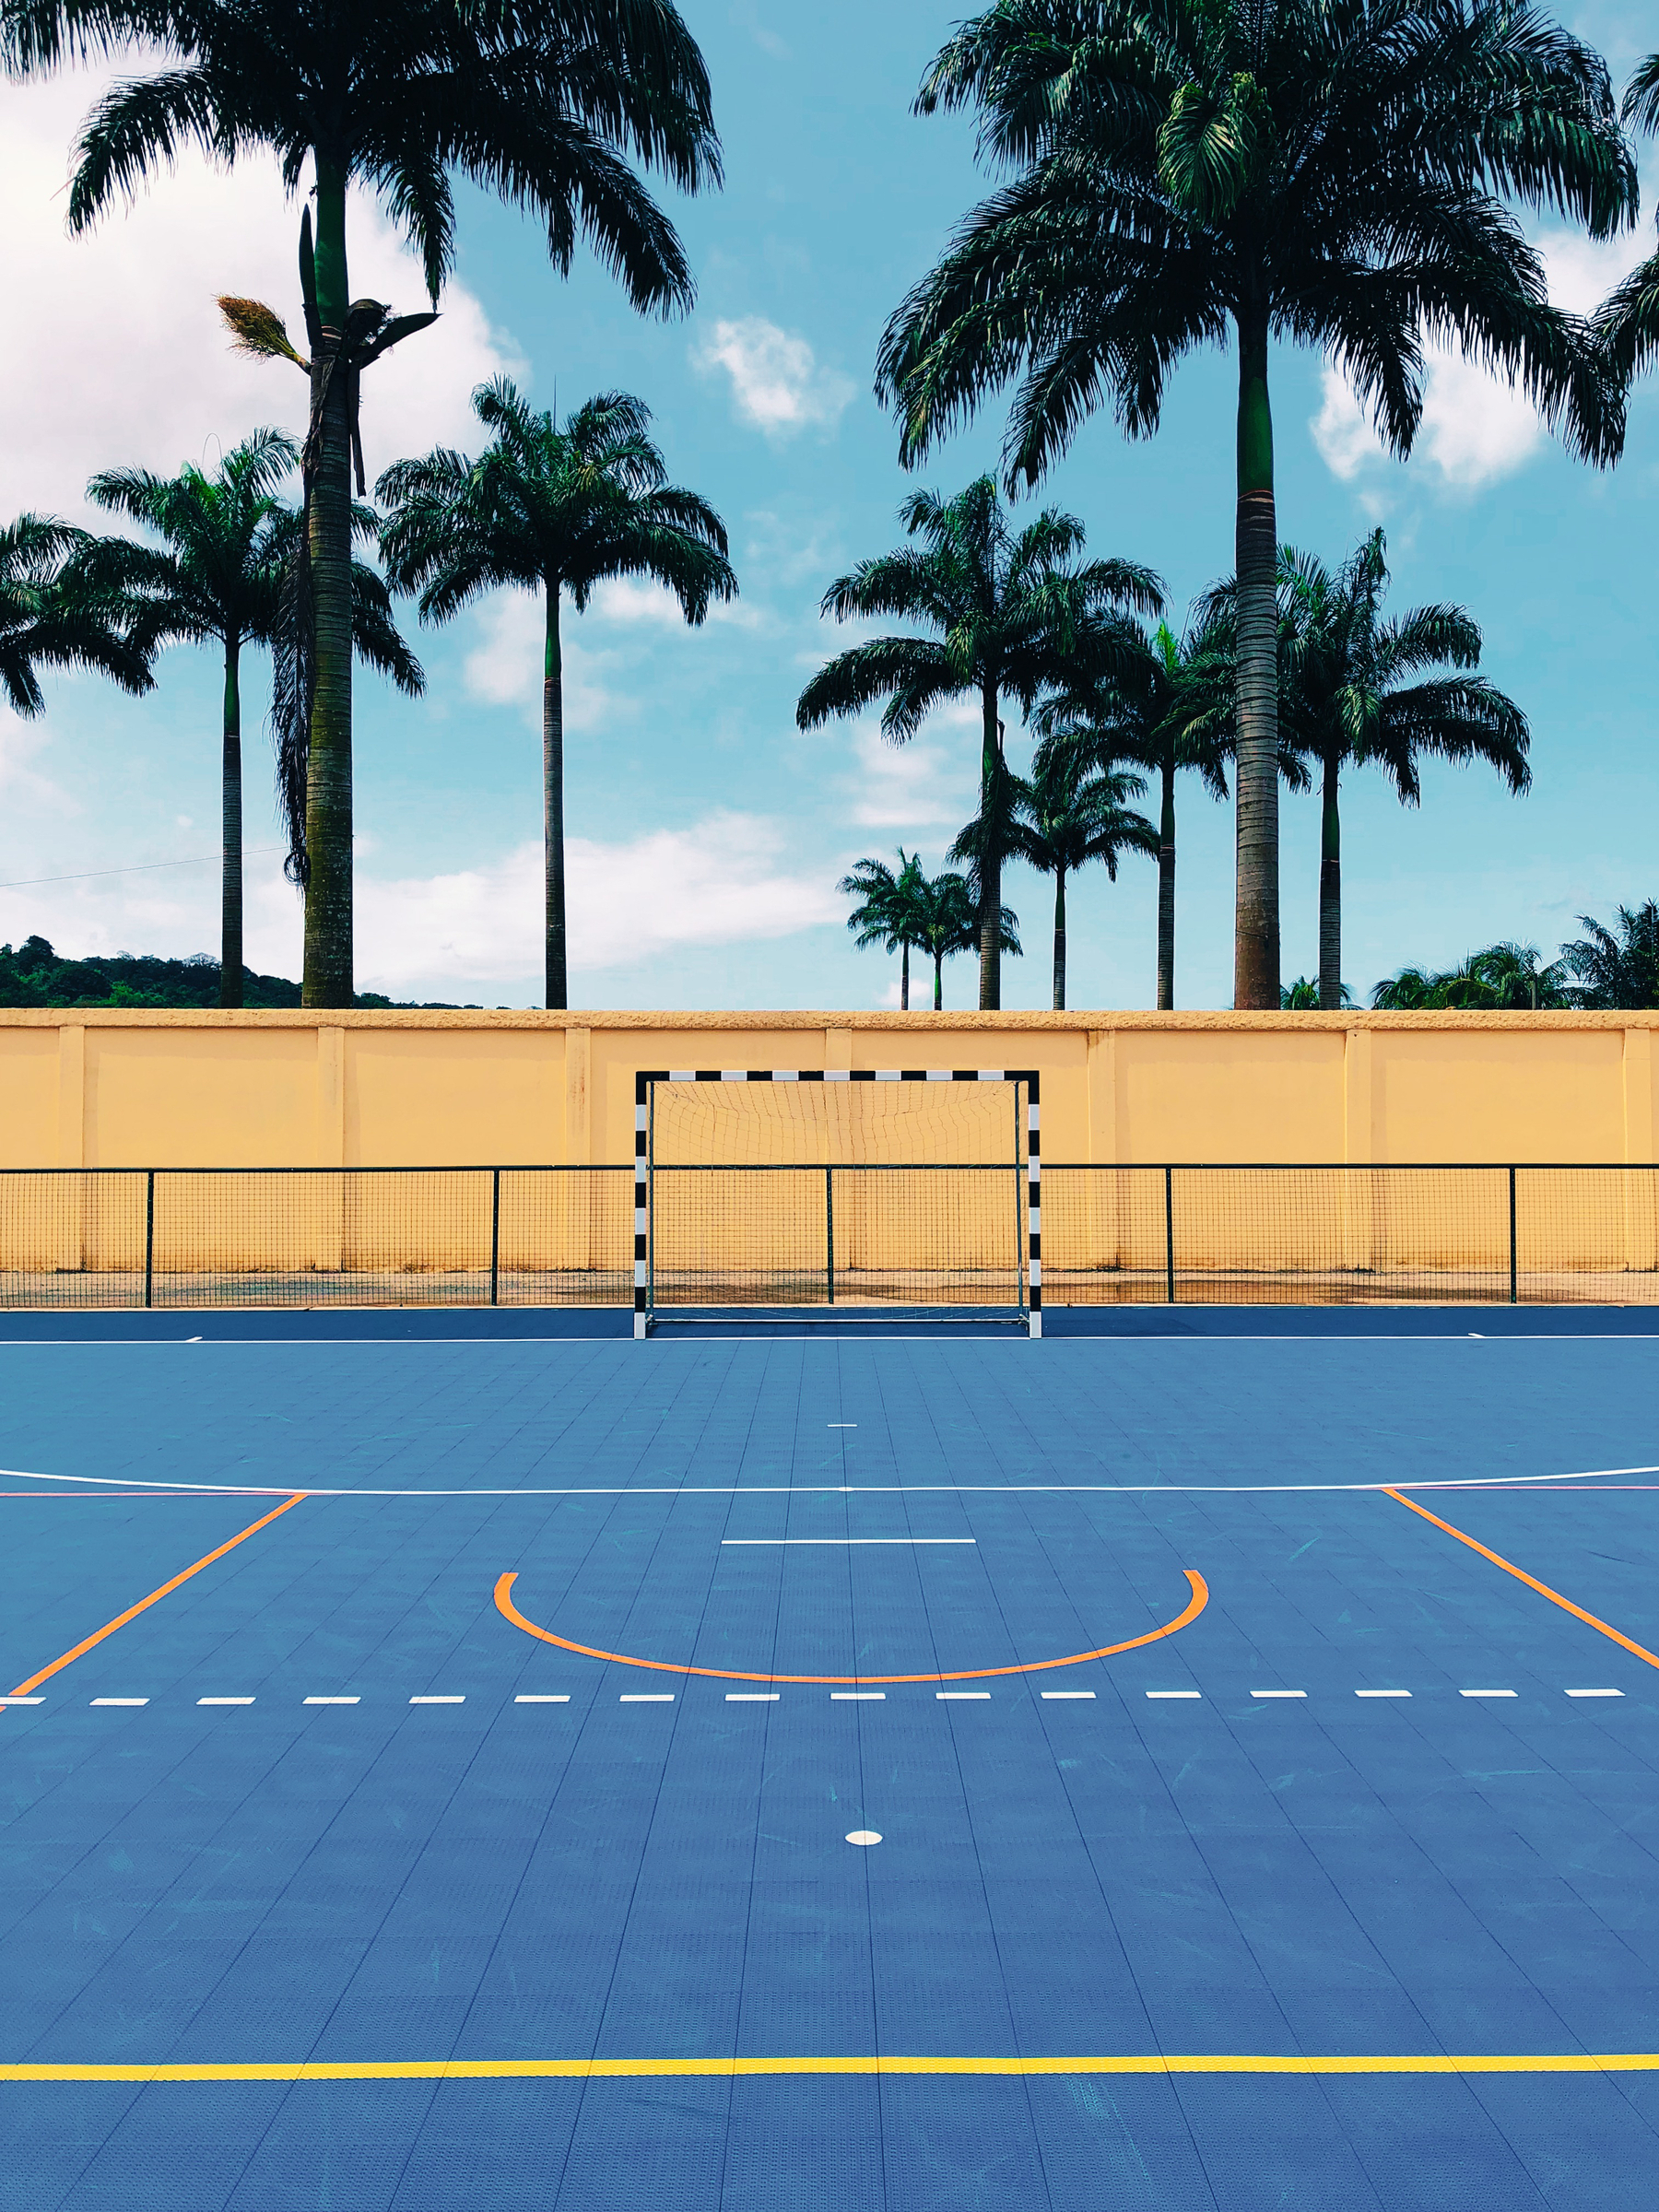 A field of palm trees behind a yellow wall. There is a goal and hand-ball court in the foreground. 